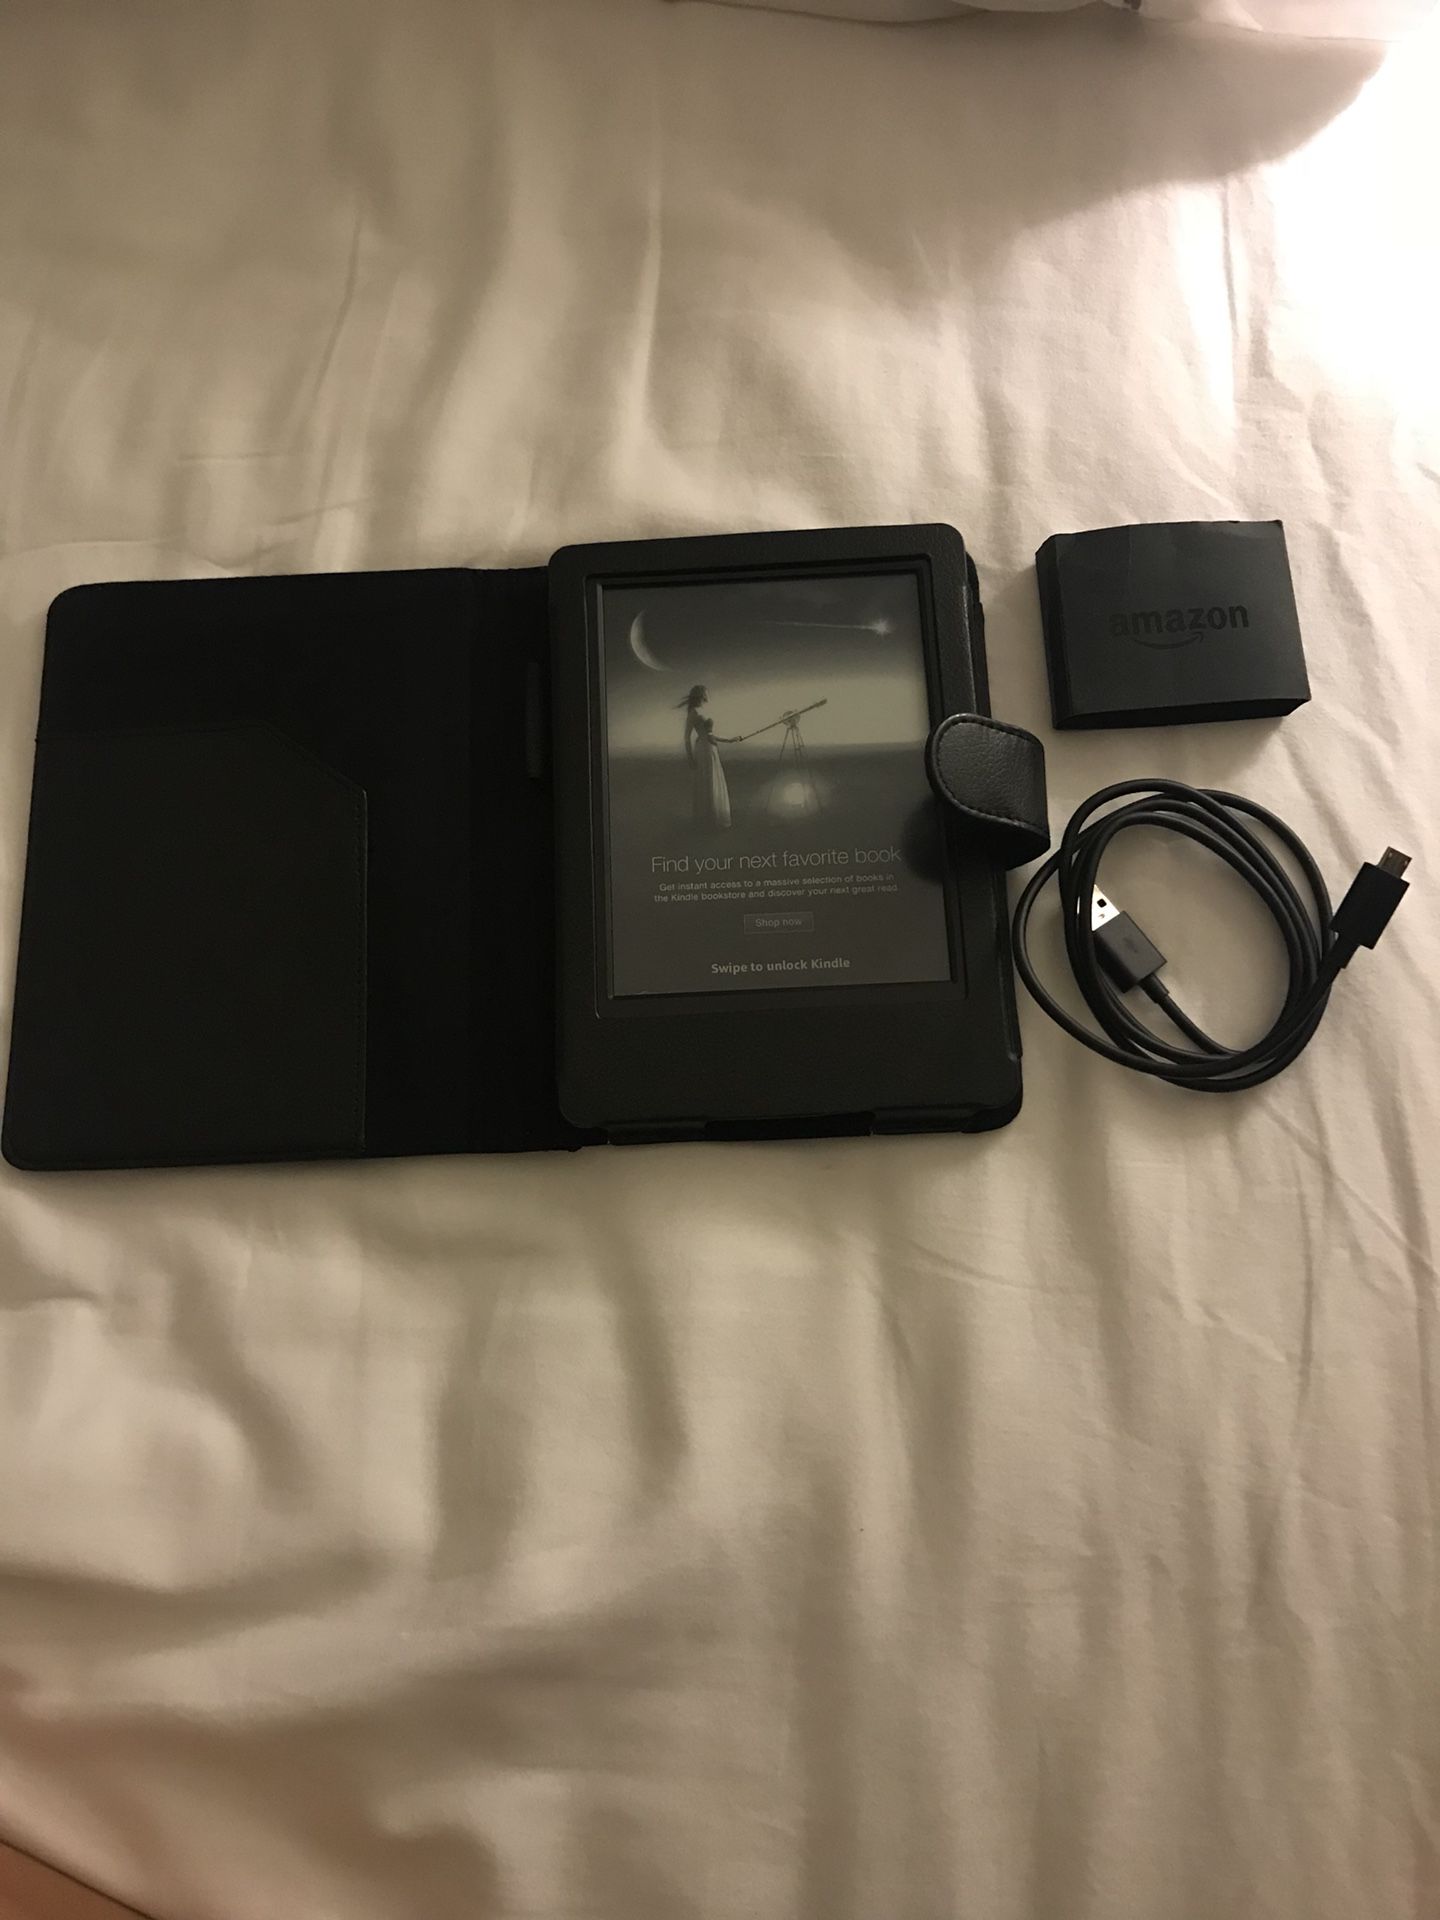 Barely used Kindle with leather case